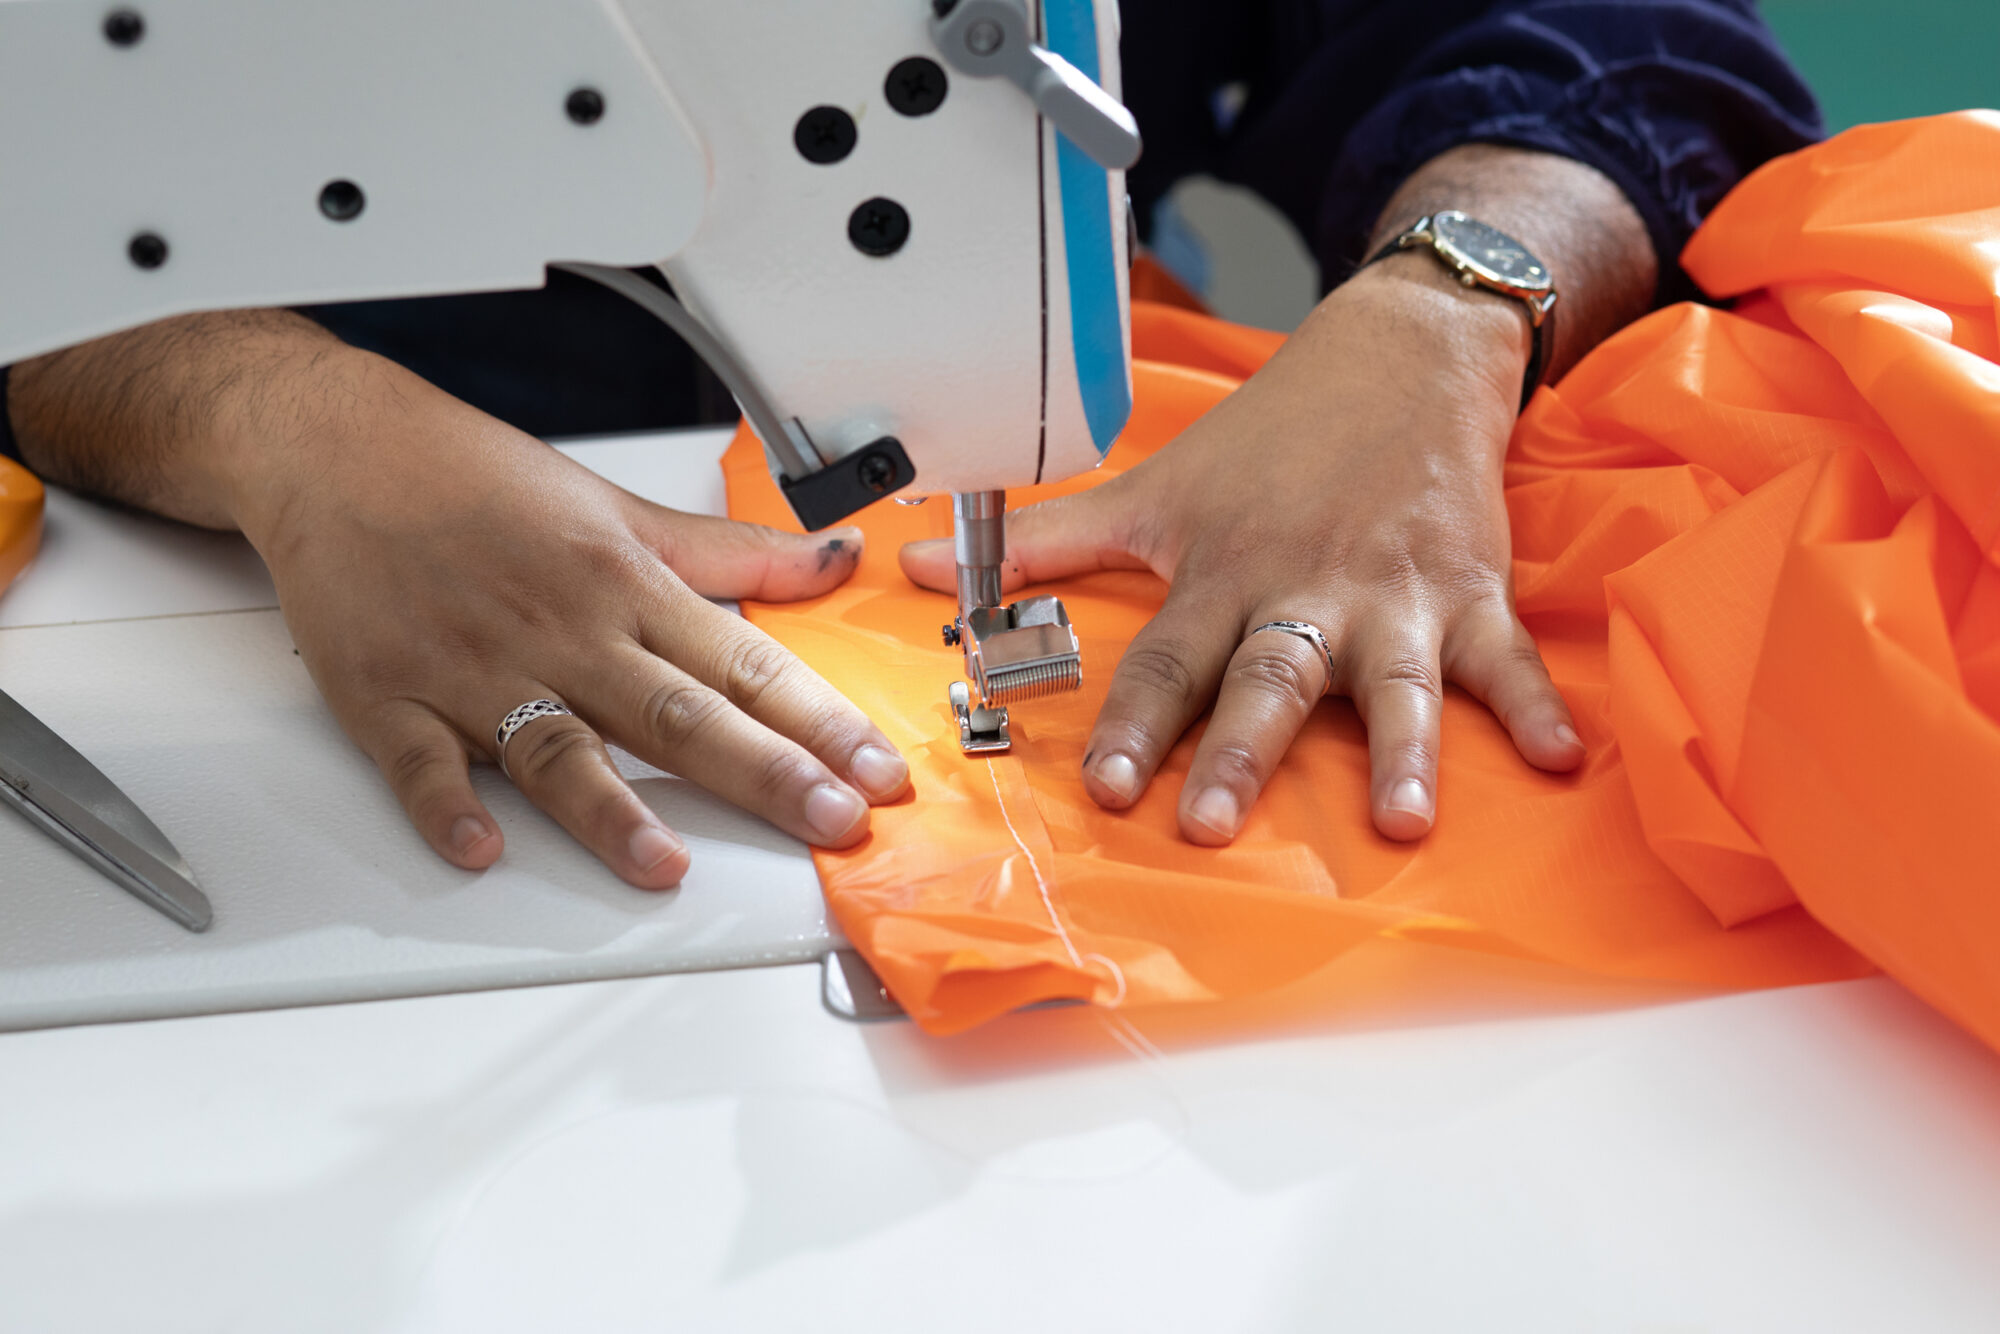 Hands guide a piece of orange fabric under a sewing machine